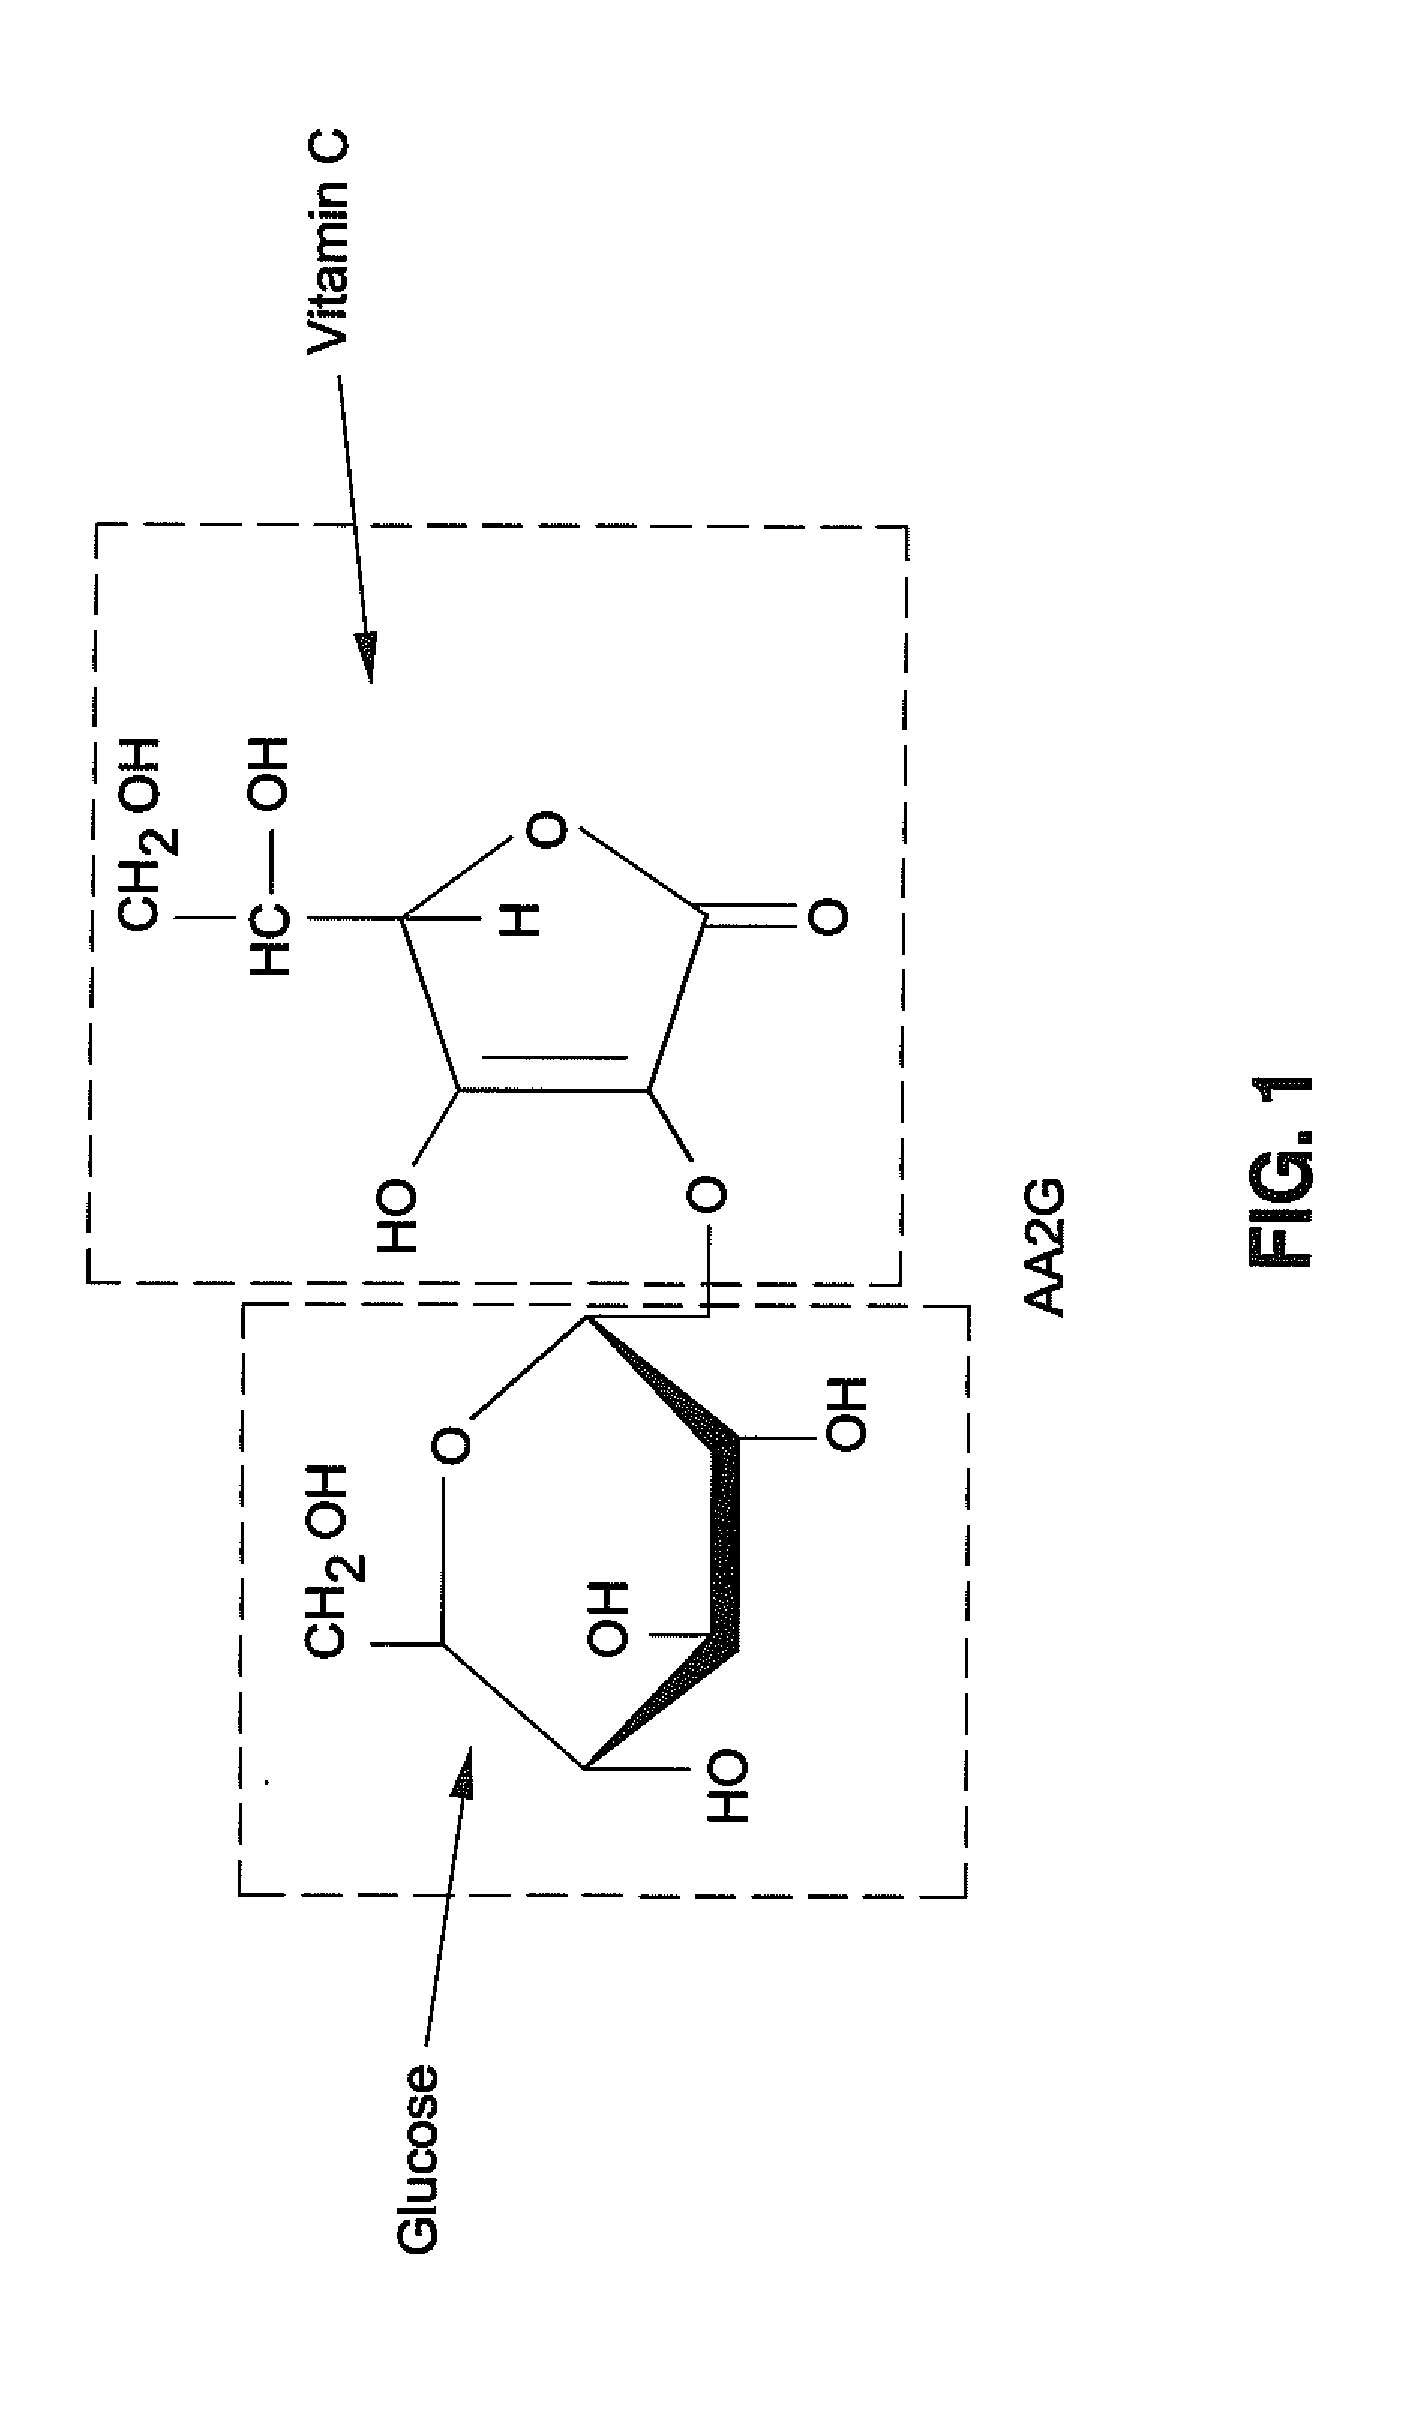 Hyaluronic acid compositions for dermatological use